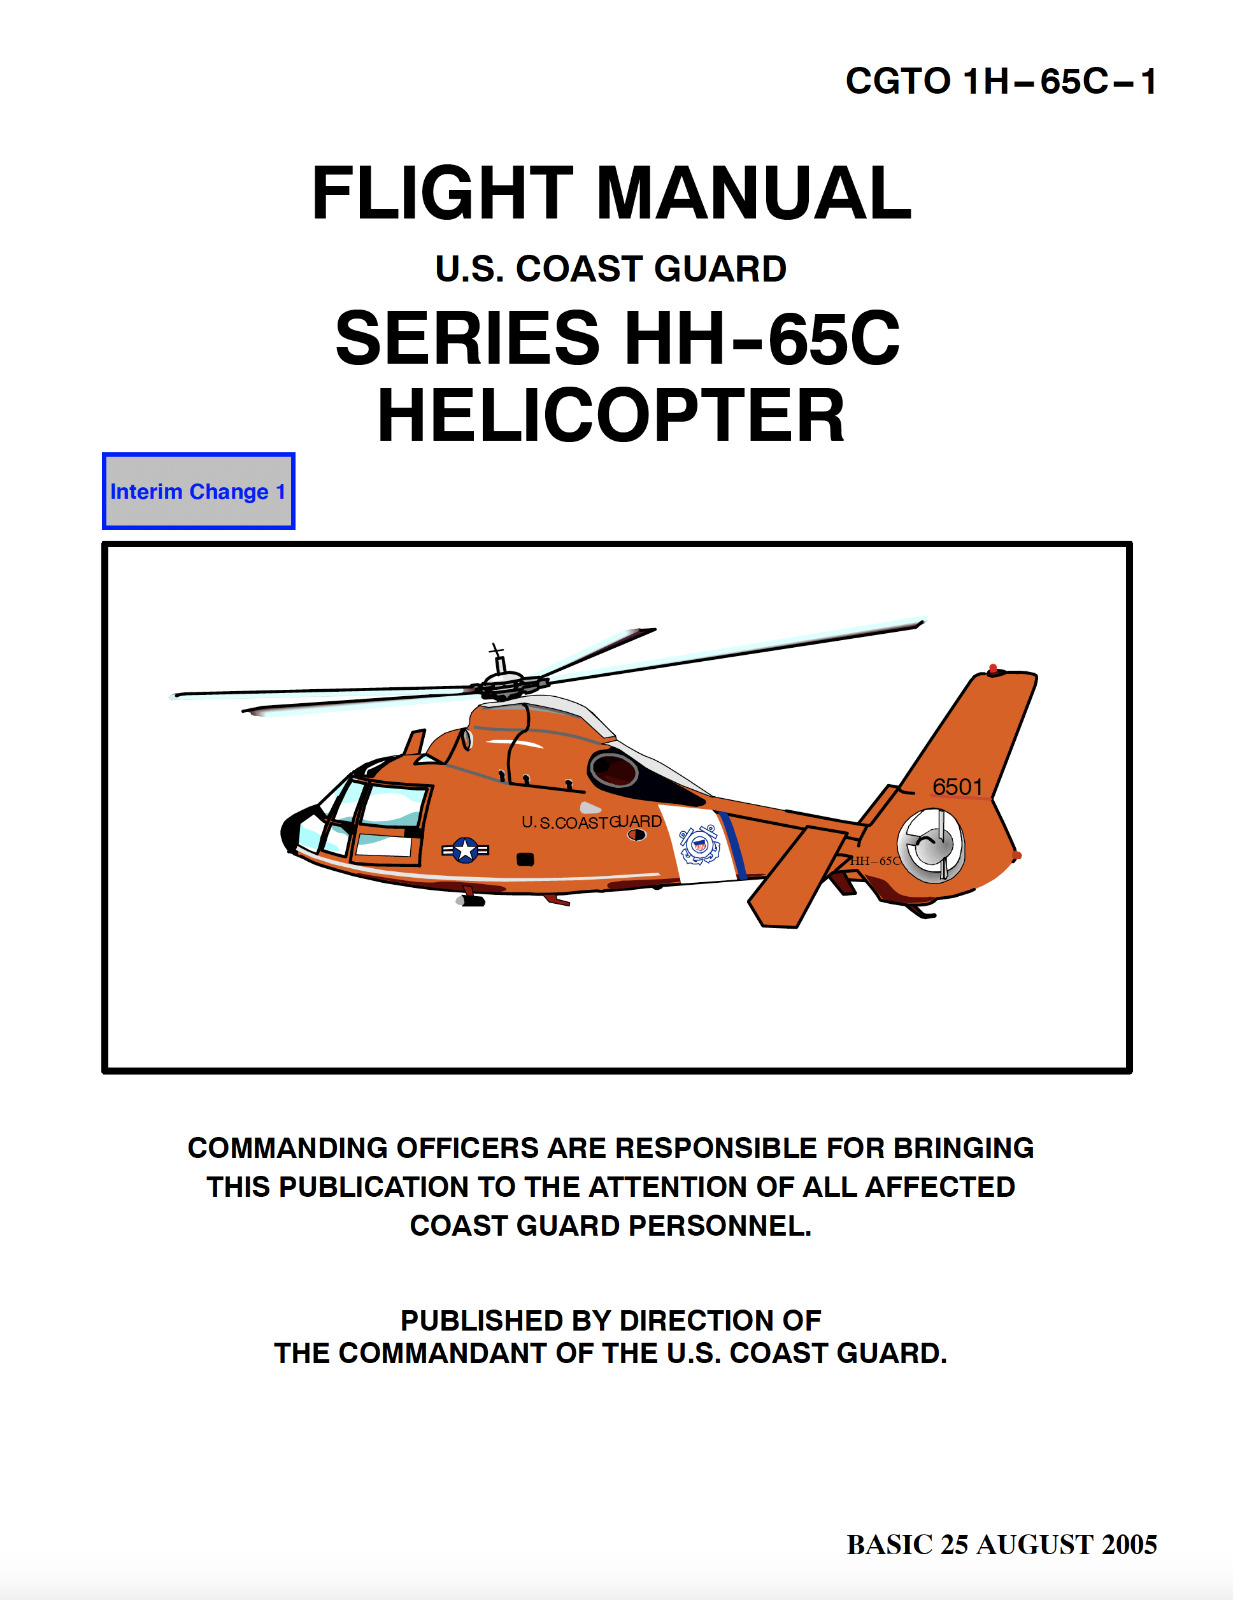 565 Page 2005 USCG Eurocopter HH-65C Dolphin CGTO 1H-65C-1 Flight Manual on CD